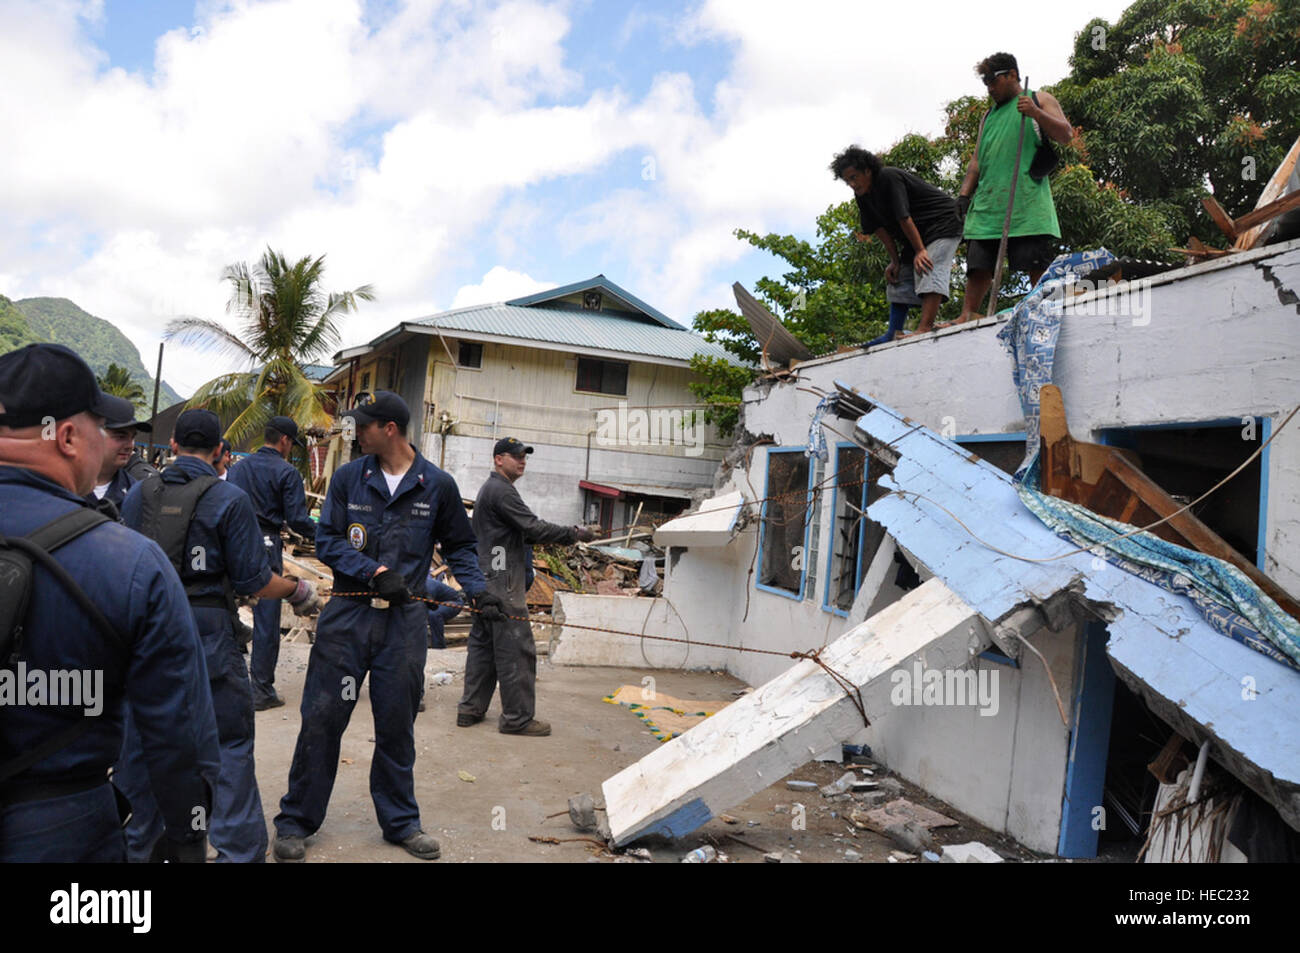 PAGO PAGO -  U. S. Navy Sailors from the U.S.S. Ingram prepare to pull down the remaining part of a roof from a home in the downtown area of Pago Pago, American Samoa on Oct. 3, 2009 after an earthquake and a tsunami left the the home and many others in ruins. (U.S.  Air Force photo/Tech Sgt. Cohen A. Young) Stock Photo